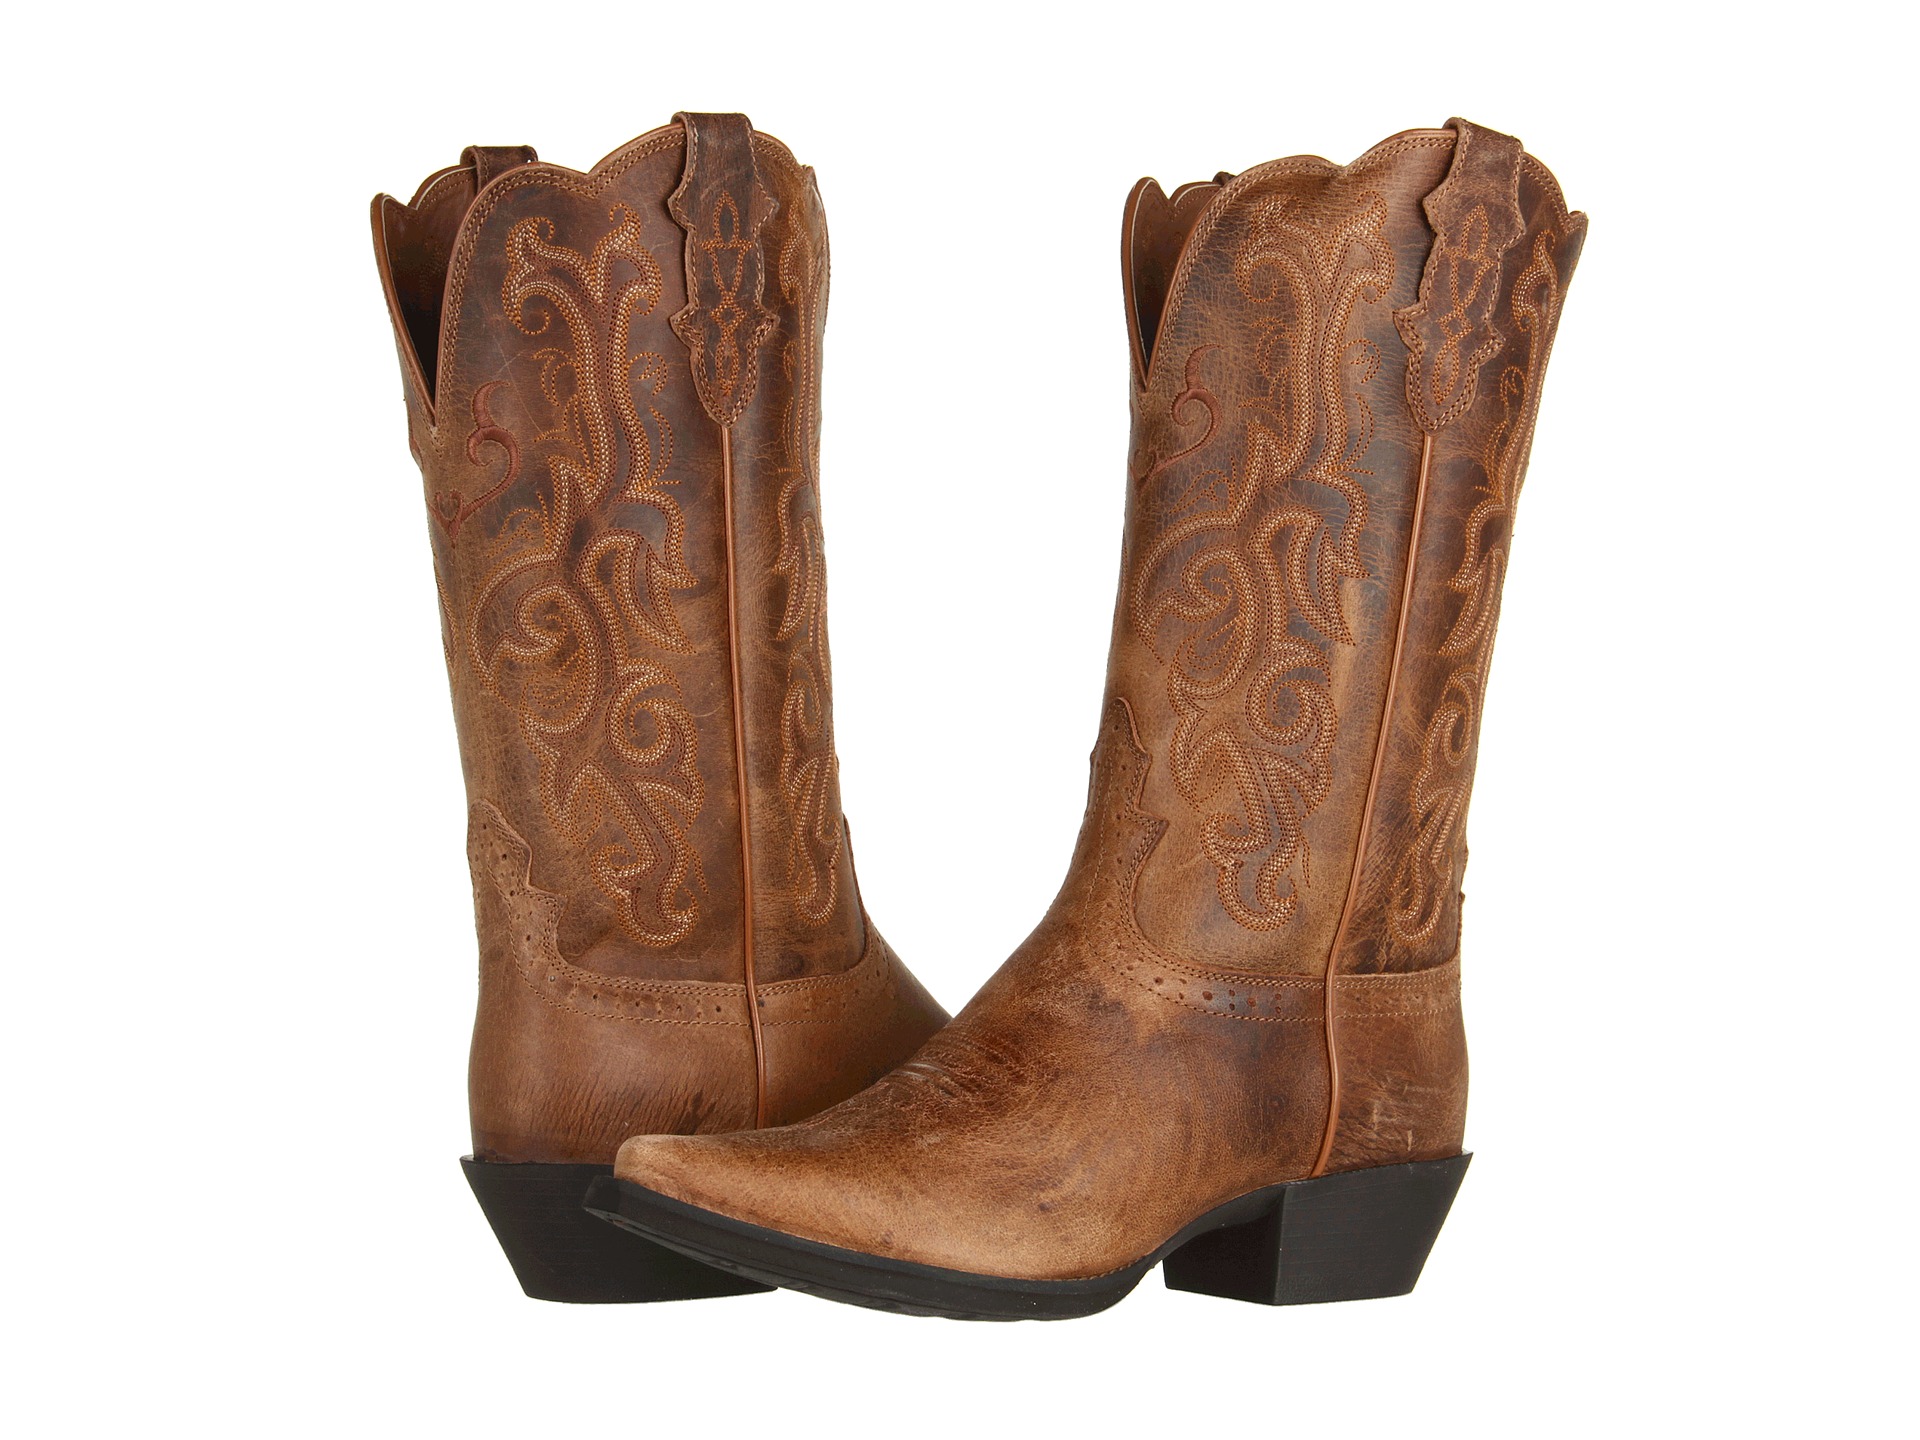 Boots, Cowboy Boots, Women | Shipped Free at Zappos